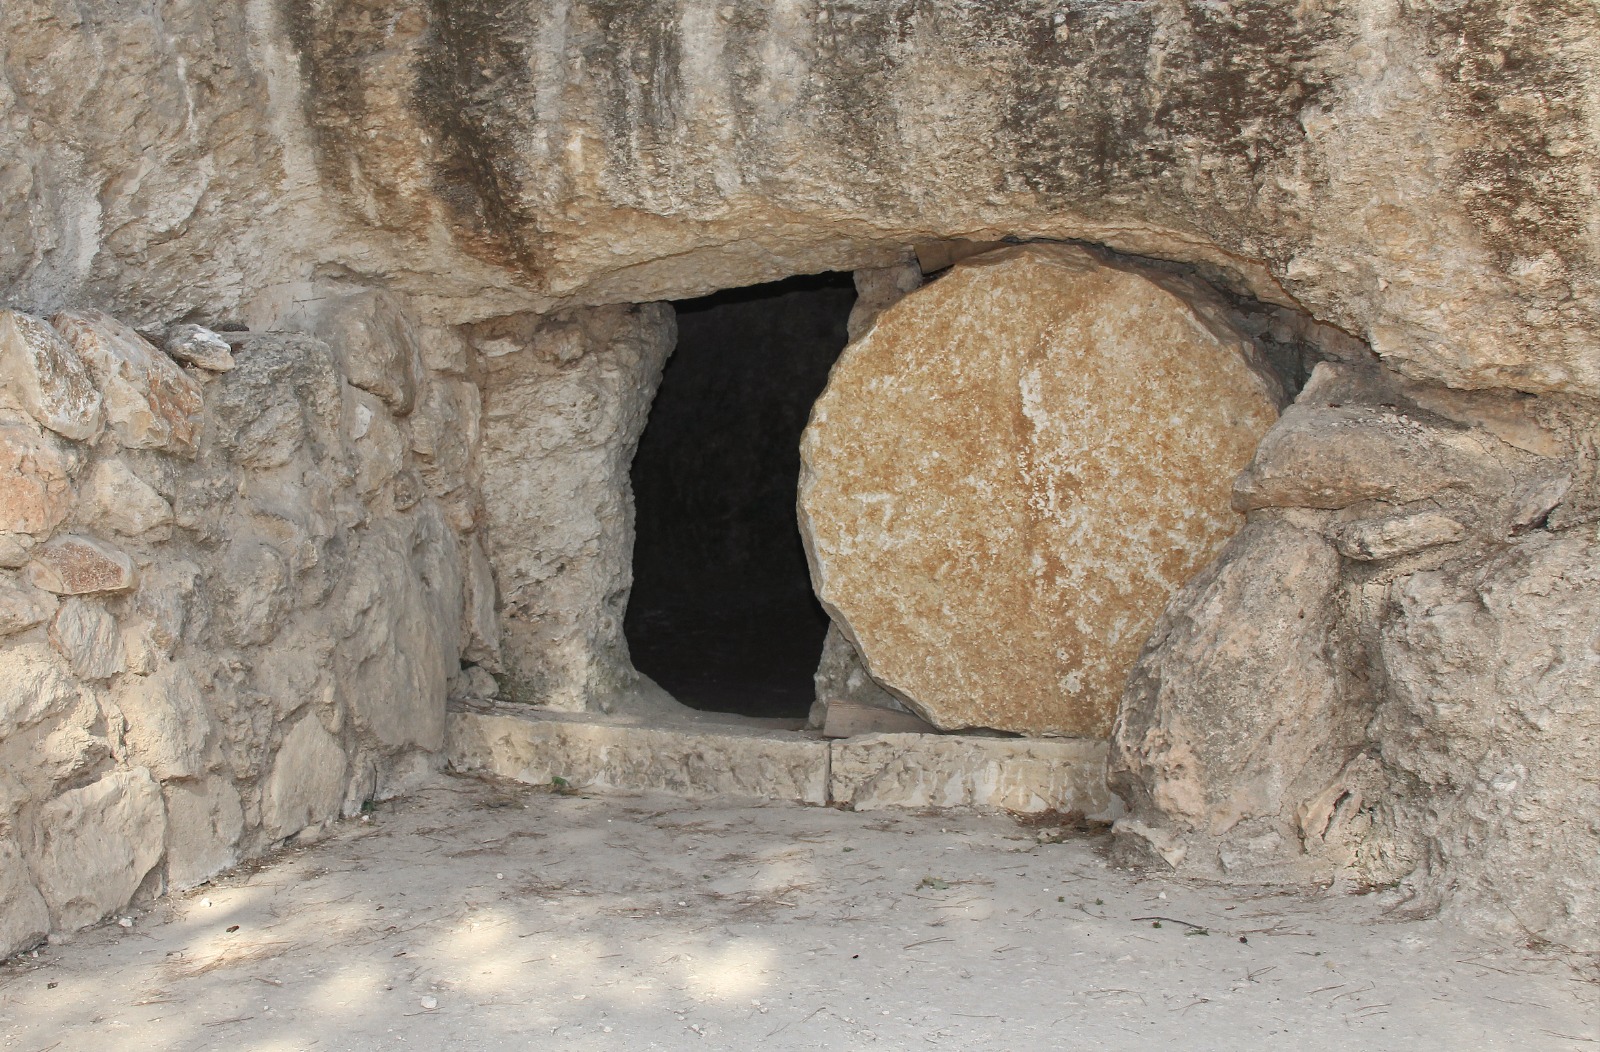  An open rock-cut tomb with a large stone rolled in front of the entrance believed to be the burial place of Jesus Christ.